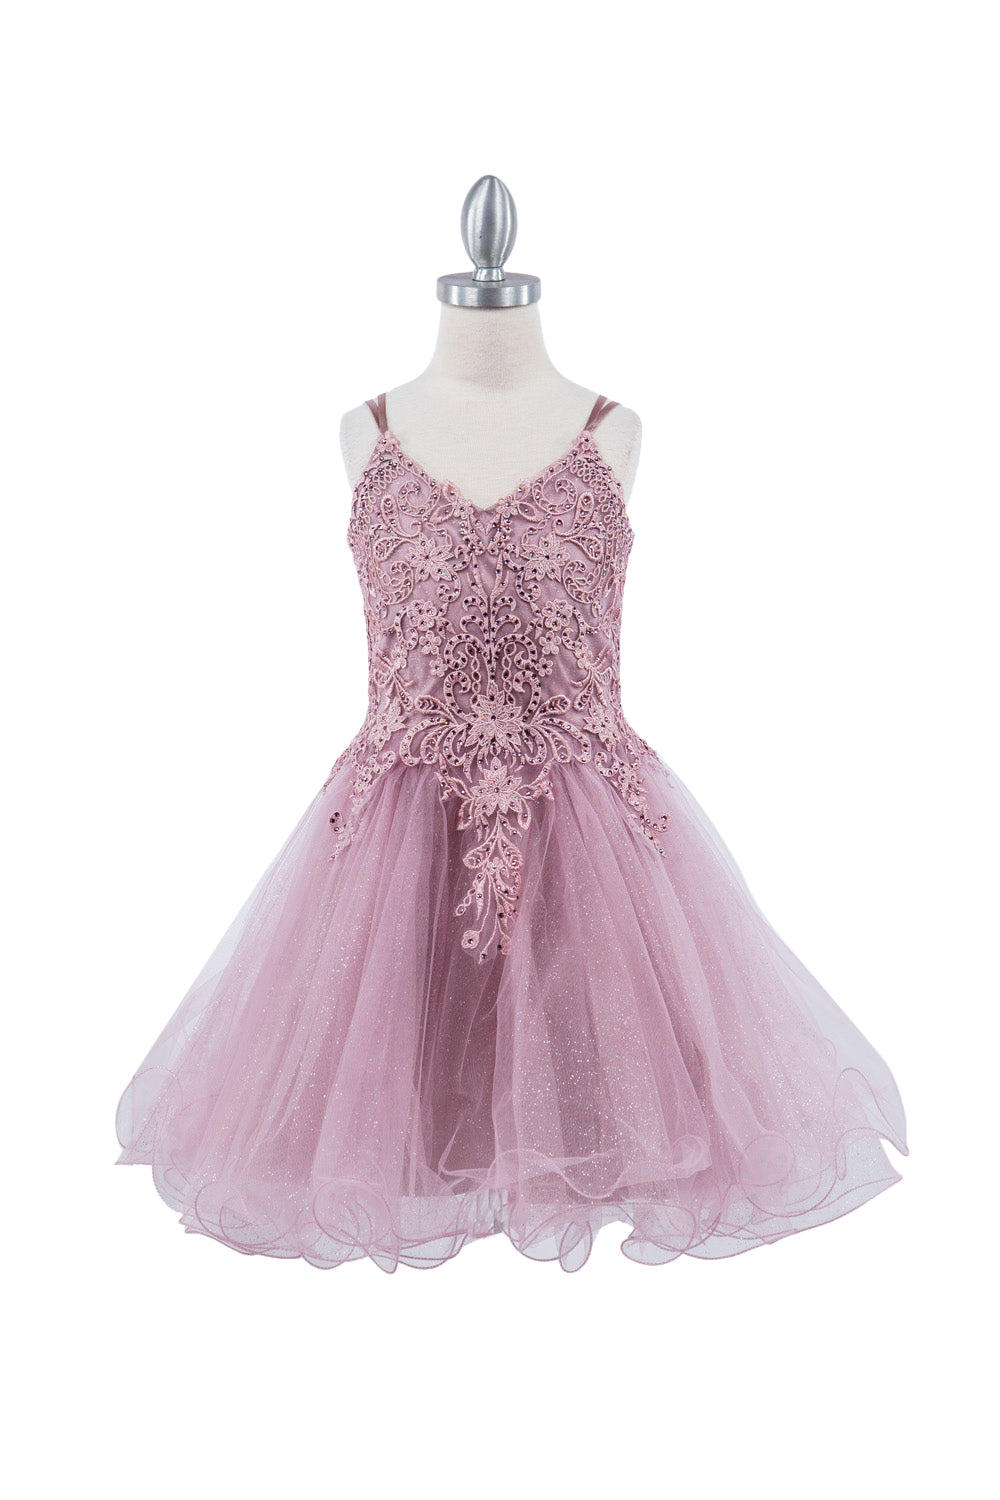 Double Spaghetti Rhinestone Embroidered Tulle Girl Dress CU5125X Elsy Style Kids Dress